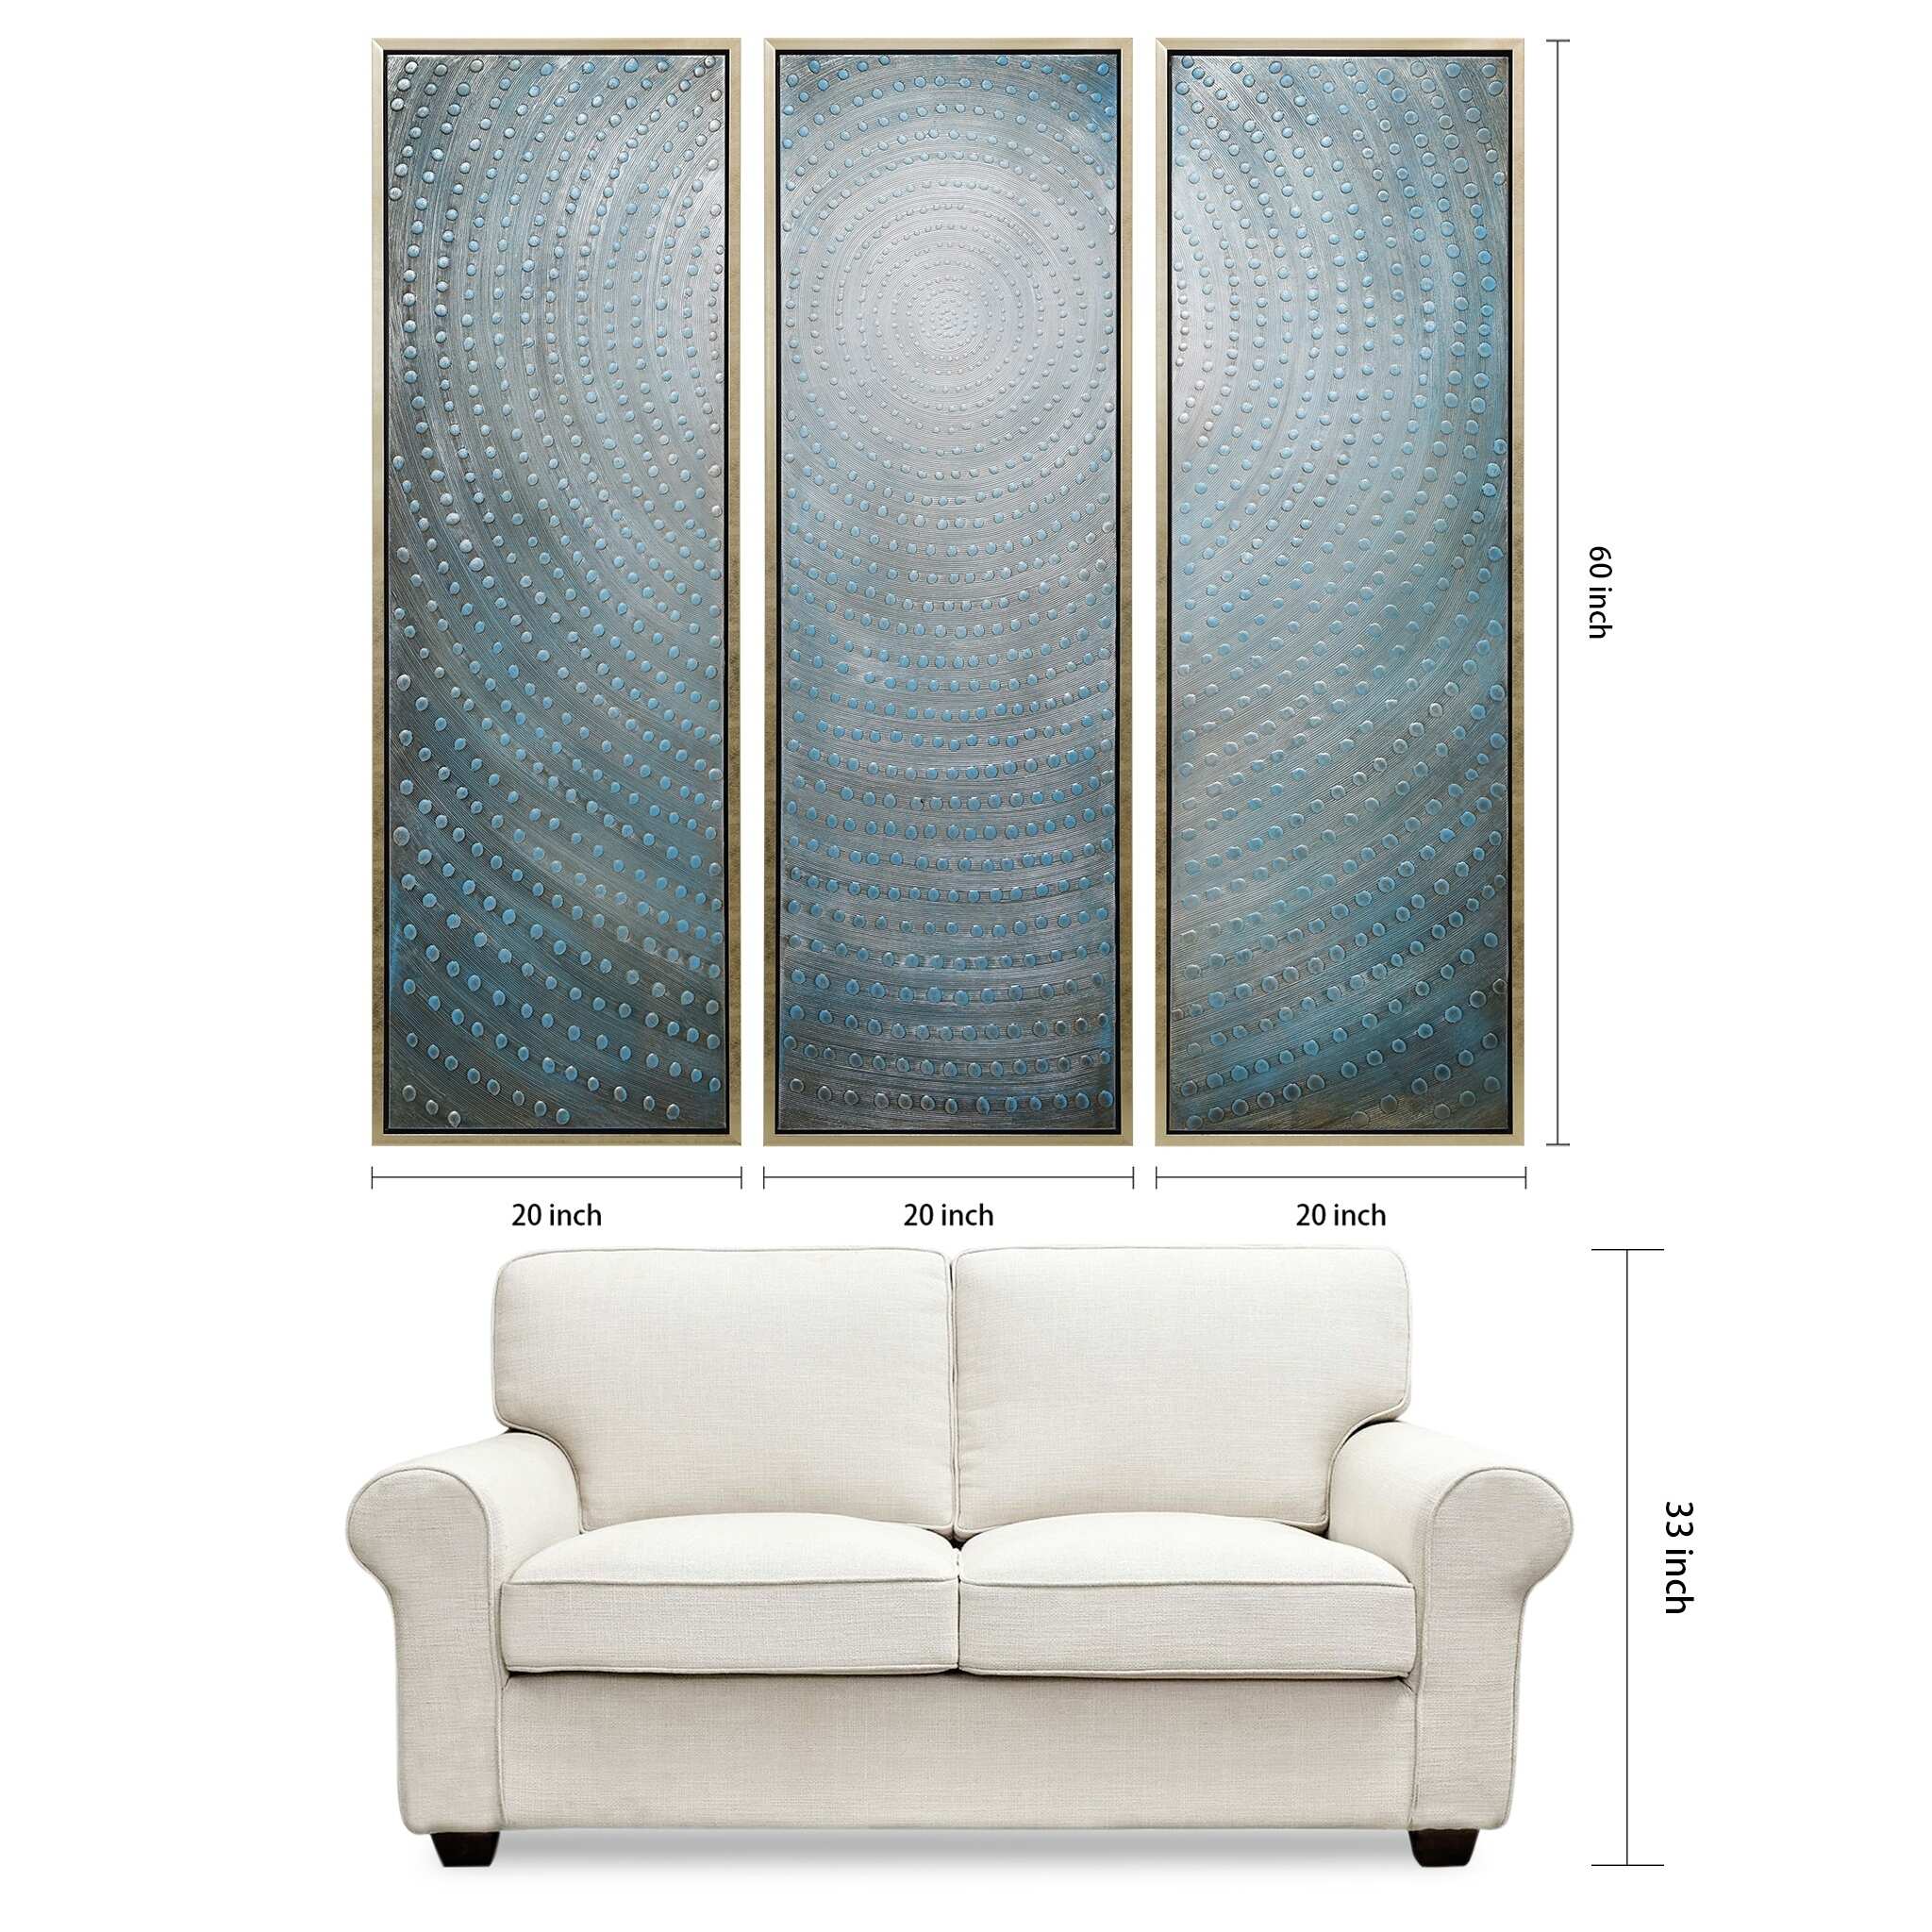 Concentric Textured Metallic Hand Painted Canvas Wall Art Set of 3